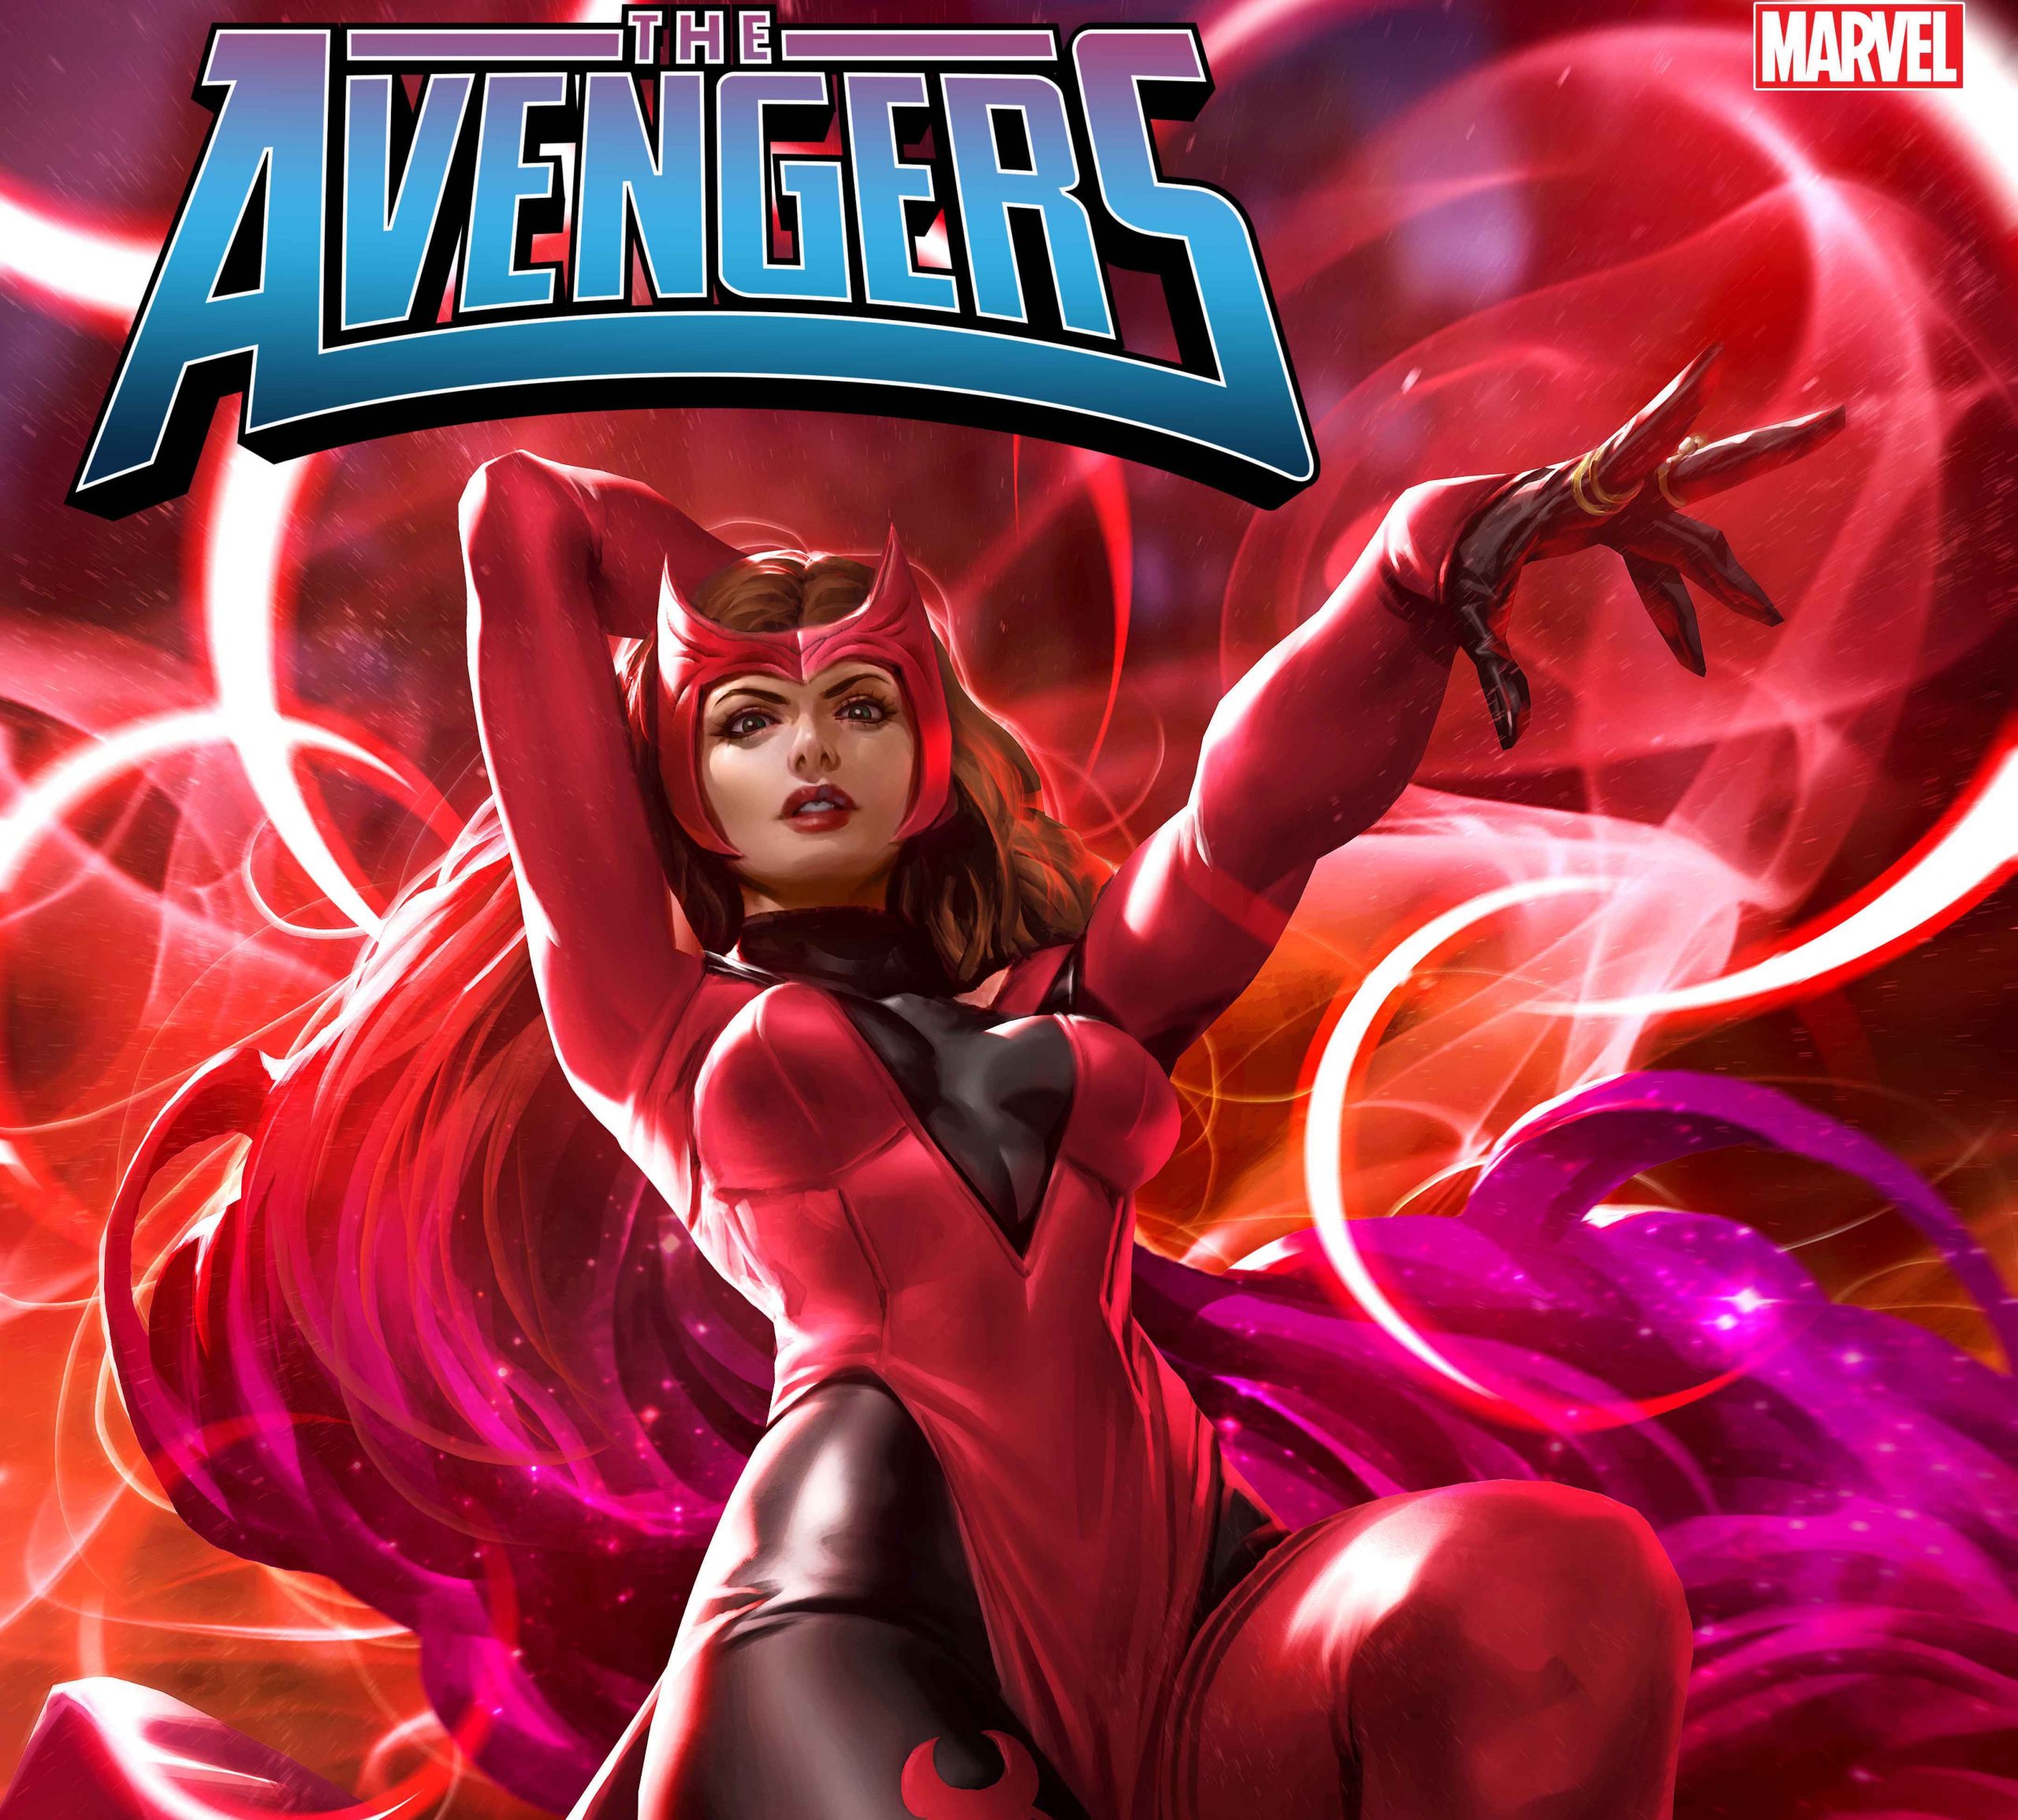 Avengers' #1 scores Scarlet Witch variant cover by Derrick Chew • AIPT